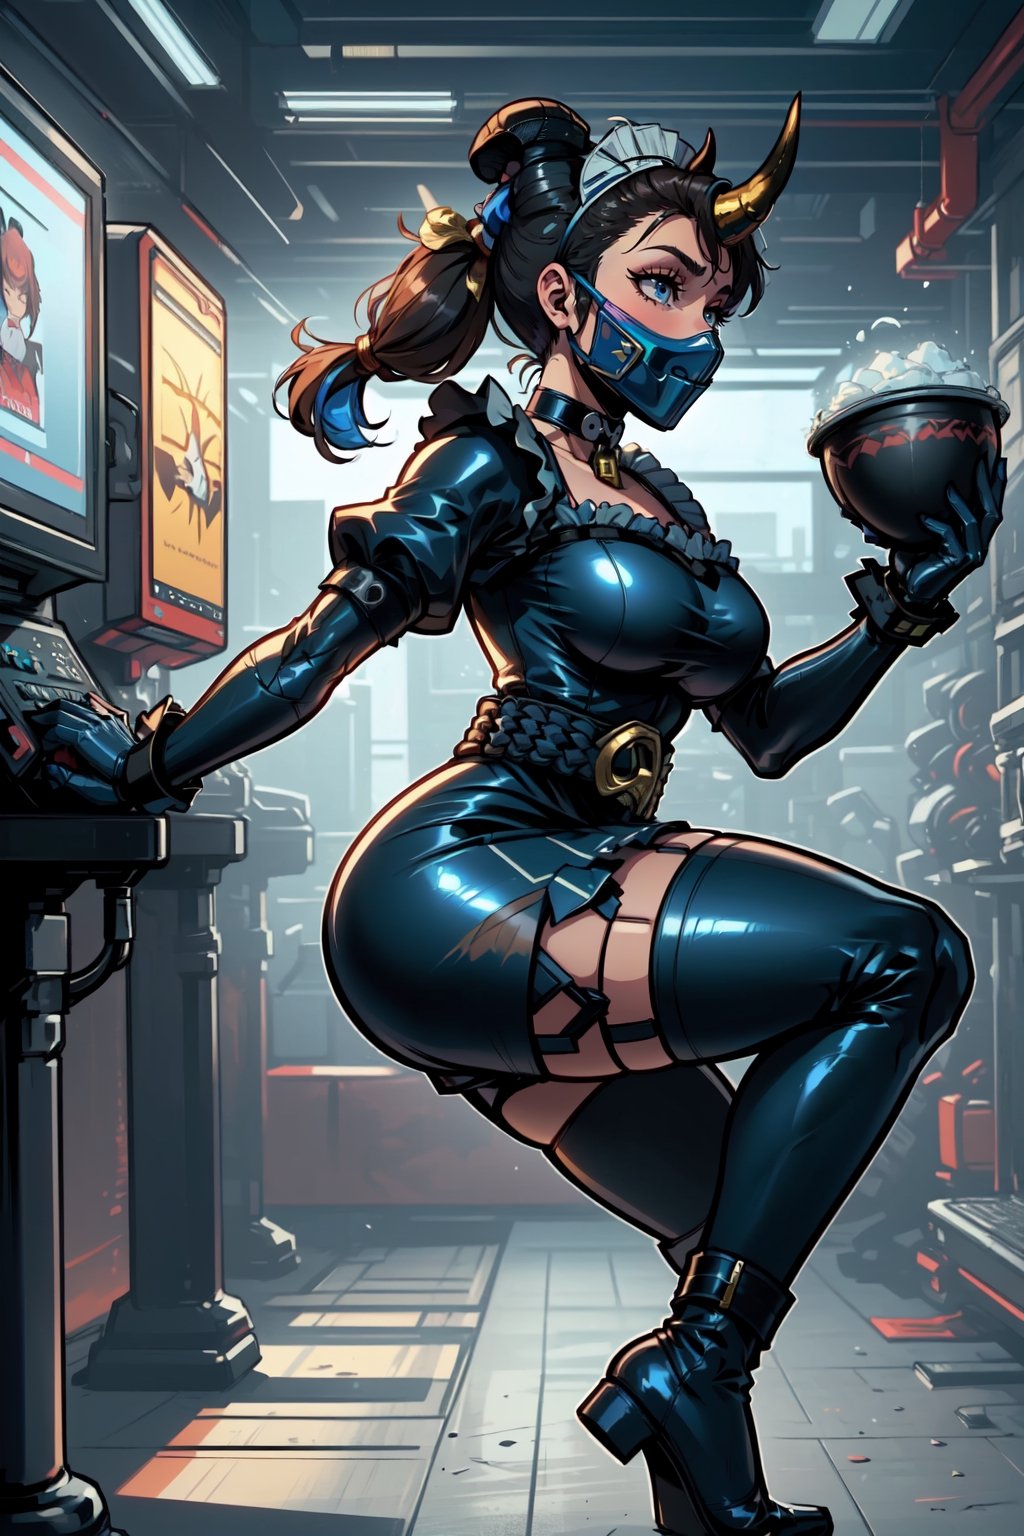 (18 year old girl:1.1),  (Extra thicc body:1.1),  (Dark skin:1.1),  medium breasts,  thick thighs,  (medium muscles:1.1),  (thick outlines:1.1),  walk pose,  (black maid outfit fused with a Mexican wrestler:1.1),  medium skirt,  showing a little black panties , ( long blue latex stockings:1.1),  (((blue latex sleeves))),  (((white knee and elbow pads:1.1))),  (((wearing a hero eyemask:1.1))),  (((with two big bull horns on the sides of her head:1.7))), (Cow belt choker:1.5), (Long hair:1), (two ponytails:2),  (((brown hair with blue highlights:1))),  (long blue fighting boots:1.1),  ((( blue kick boxing fingerless gloves:1.1))),  full body figure,  3 perspective,  purple eyes,  (((dark blue dress))),  black,  white and gold,  photorealistic, ( perfect hands:1.1),  masterpiece:1.2, ( detailed face:1.1), (Background Tijuana Gym arcade neon:1), (background arcade and Gym) Sandbags are  x men centinels robots, Add more detail,